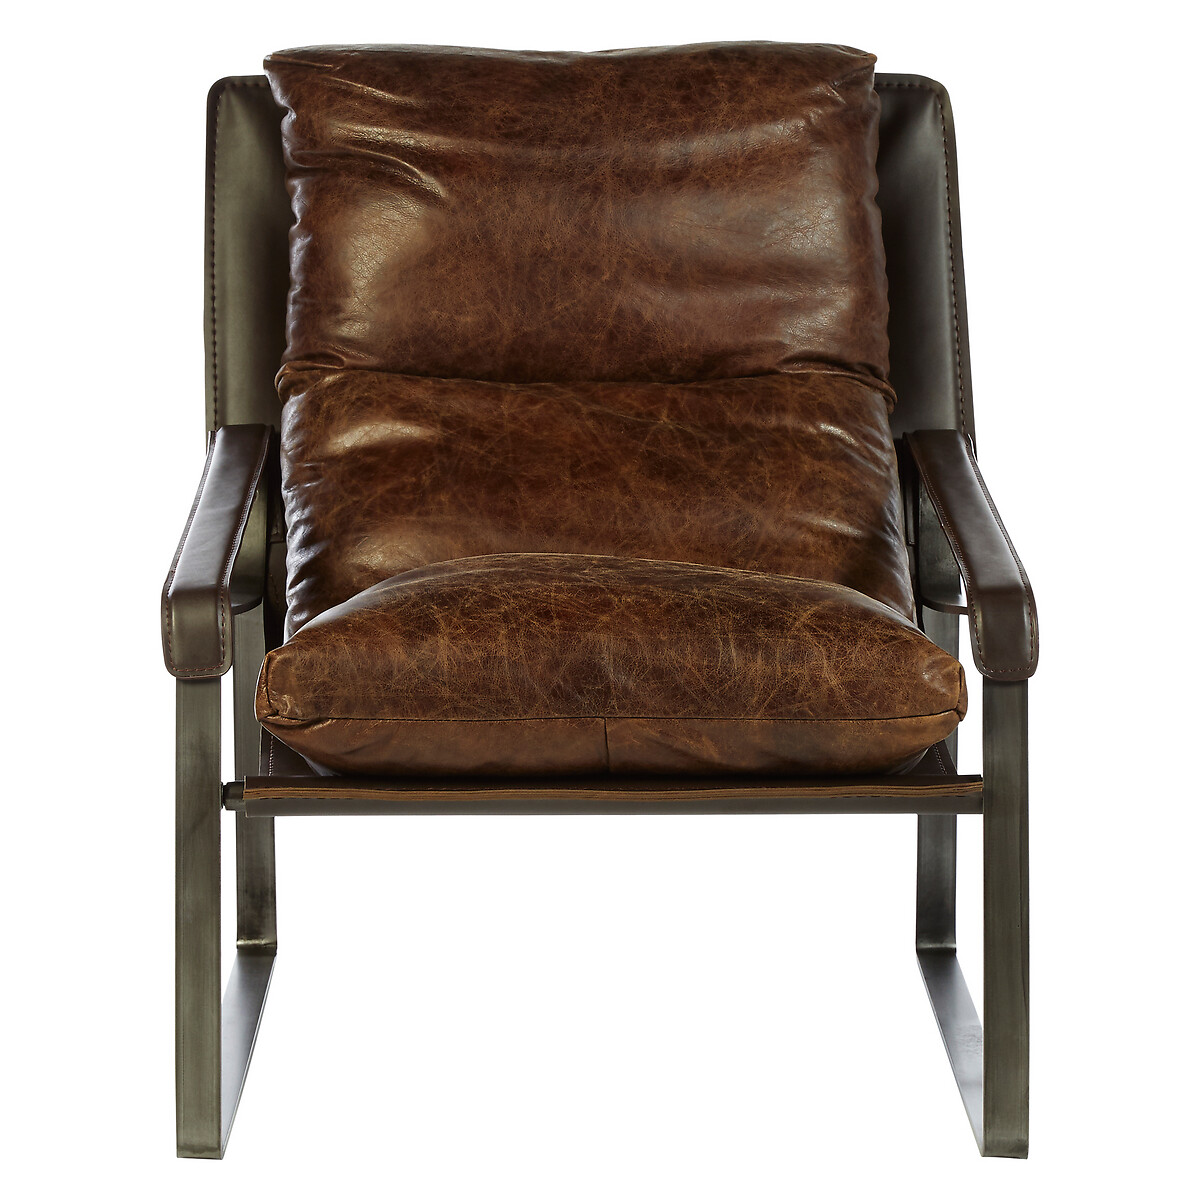 Distressed Leather Industrial Style, Distressed Brown Leather Chair